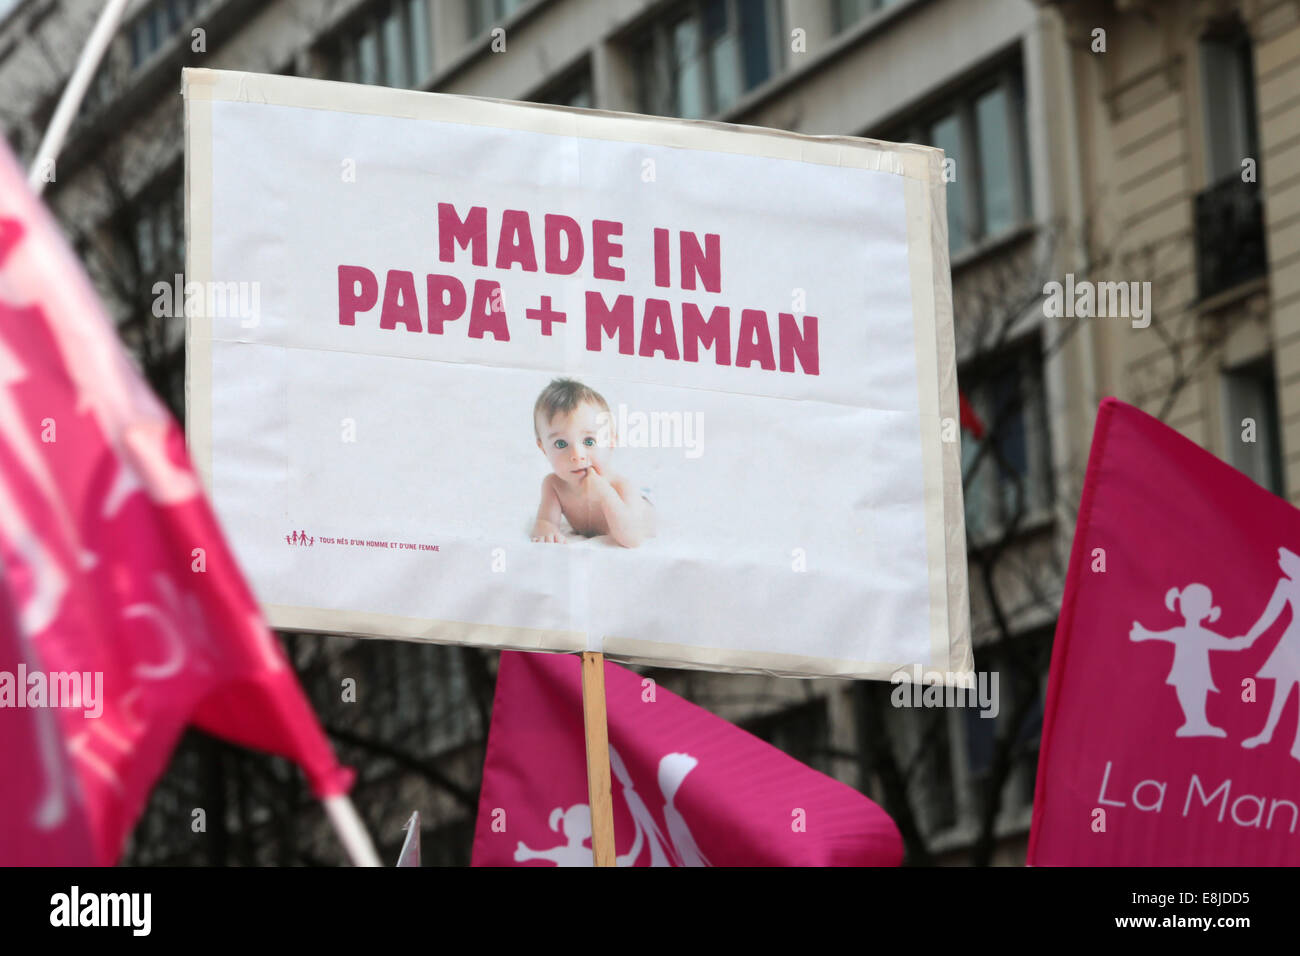 Sign : 'Madein Mom + Dad.' Paris event anti 'Wedding for All'. Stock Photo